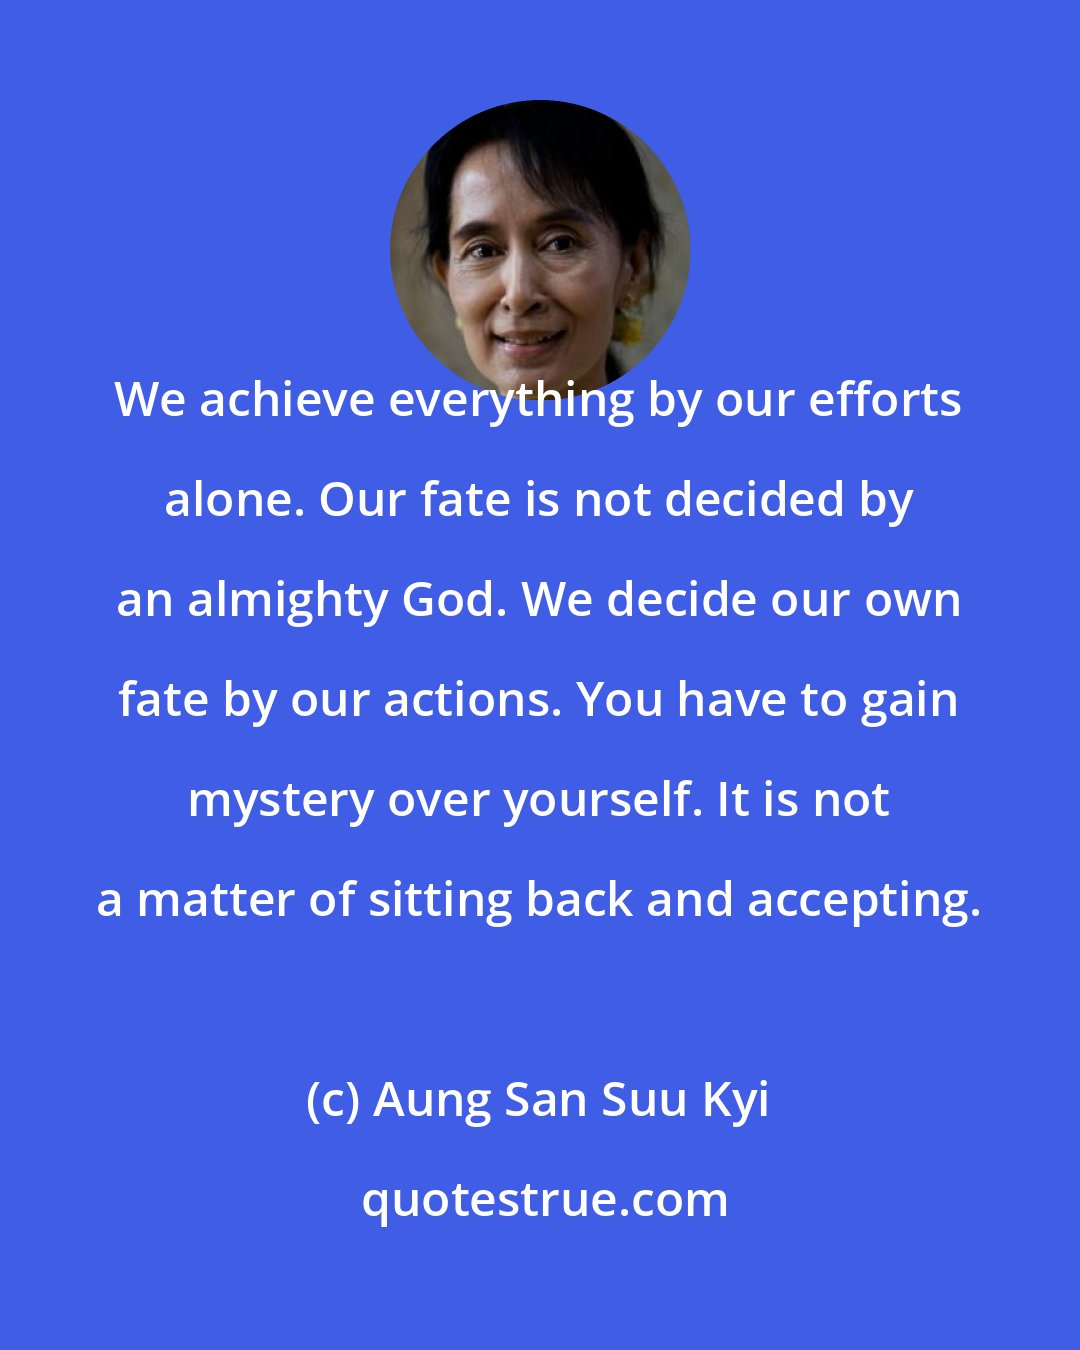 Aung San Suu Kyi: We achieve everything by our efforts alone. Our fate is not decided by an almighty God. We decide our own fate by our actions. You have to gain mystery over yourself. It is not a matter of sitting back and accepting.